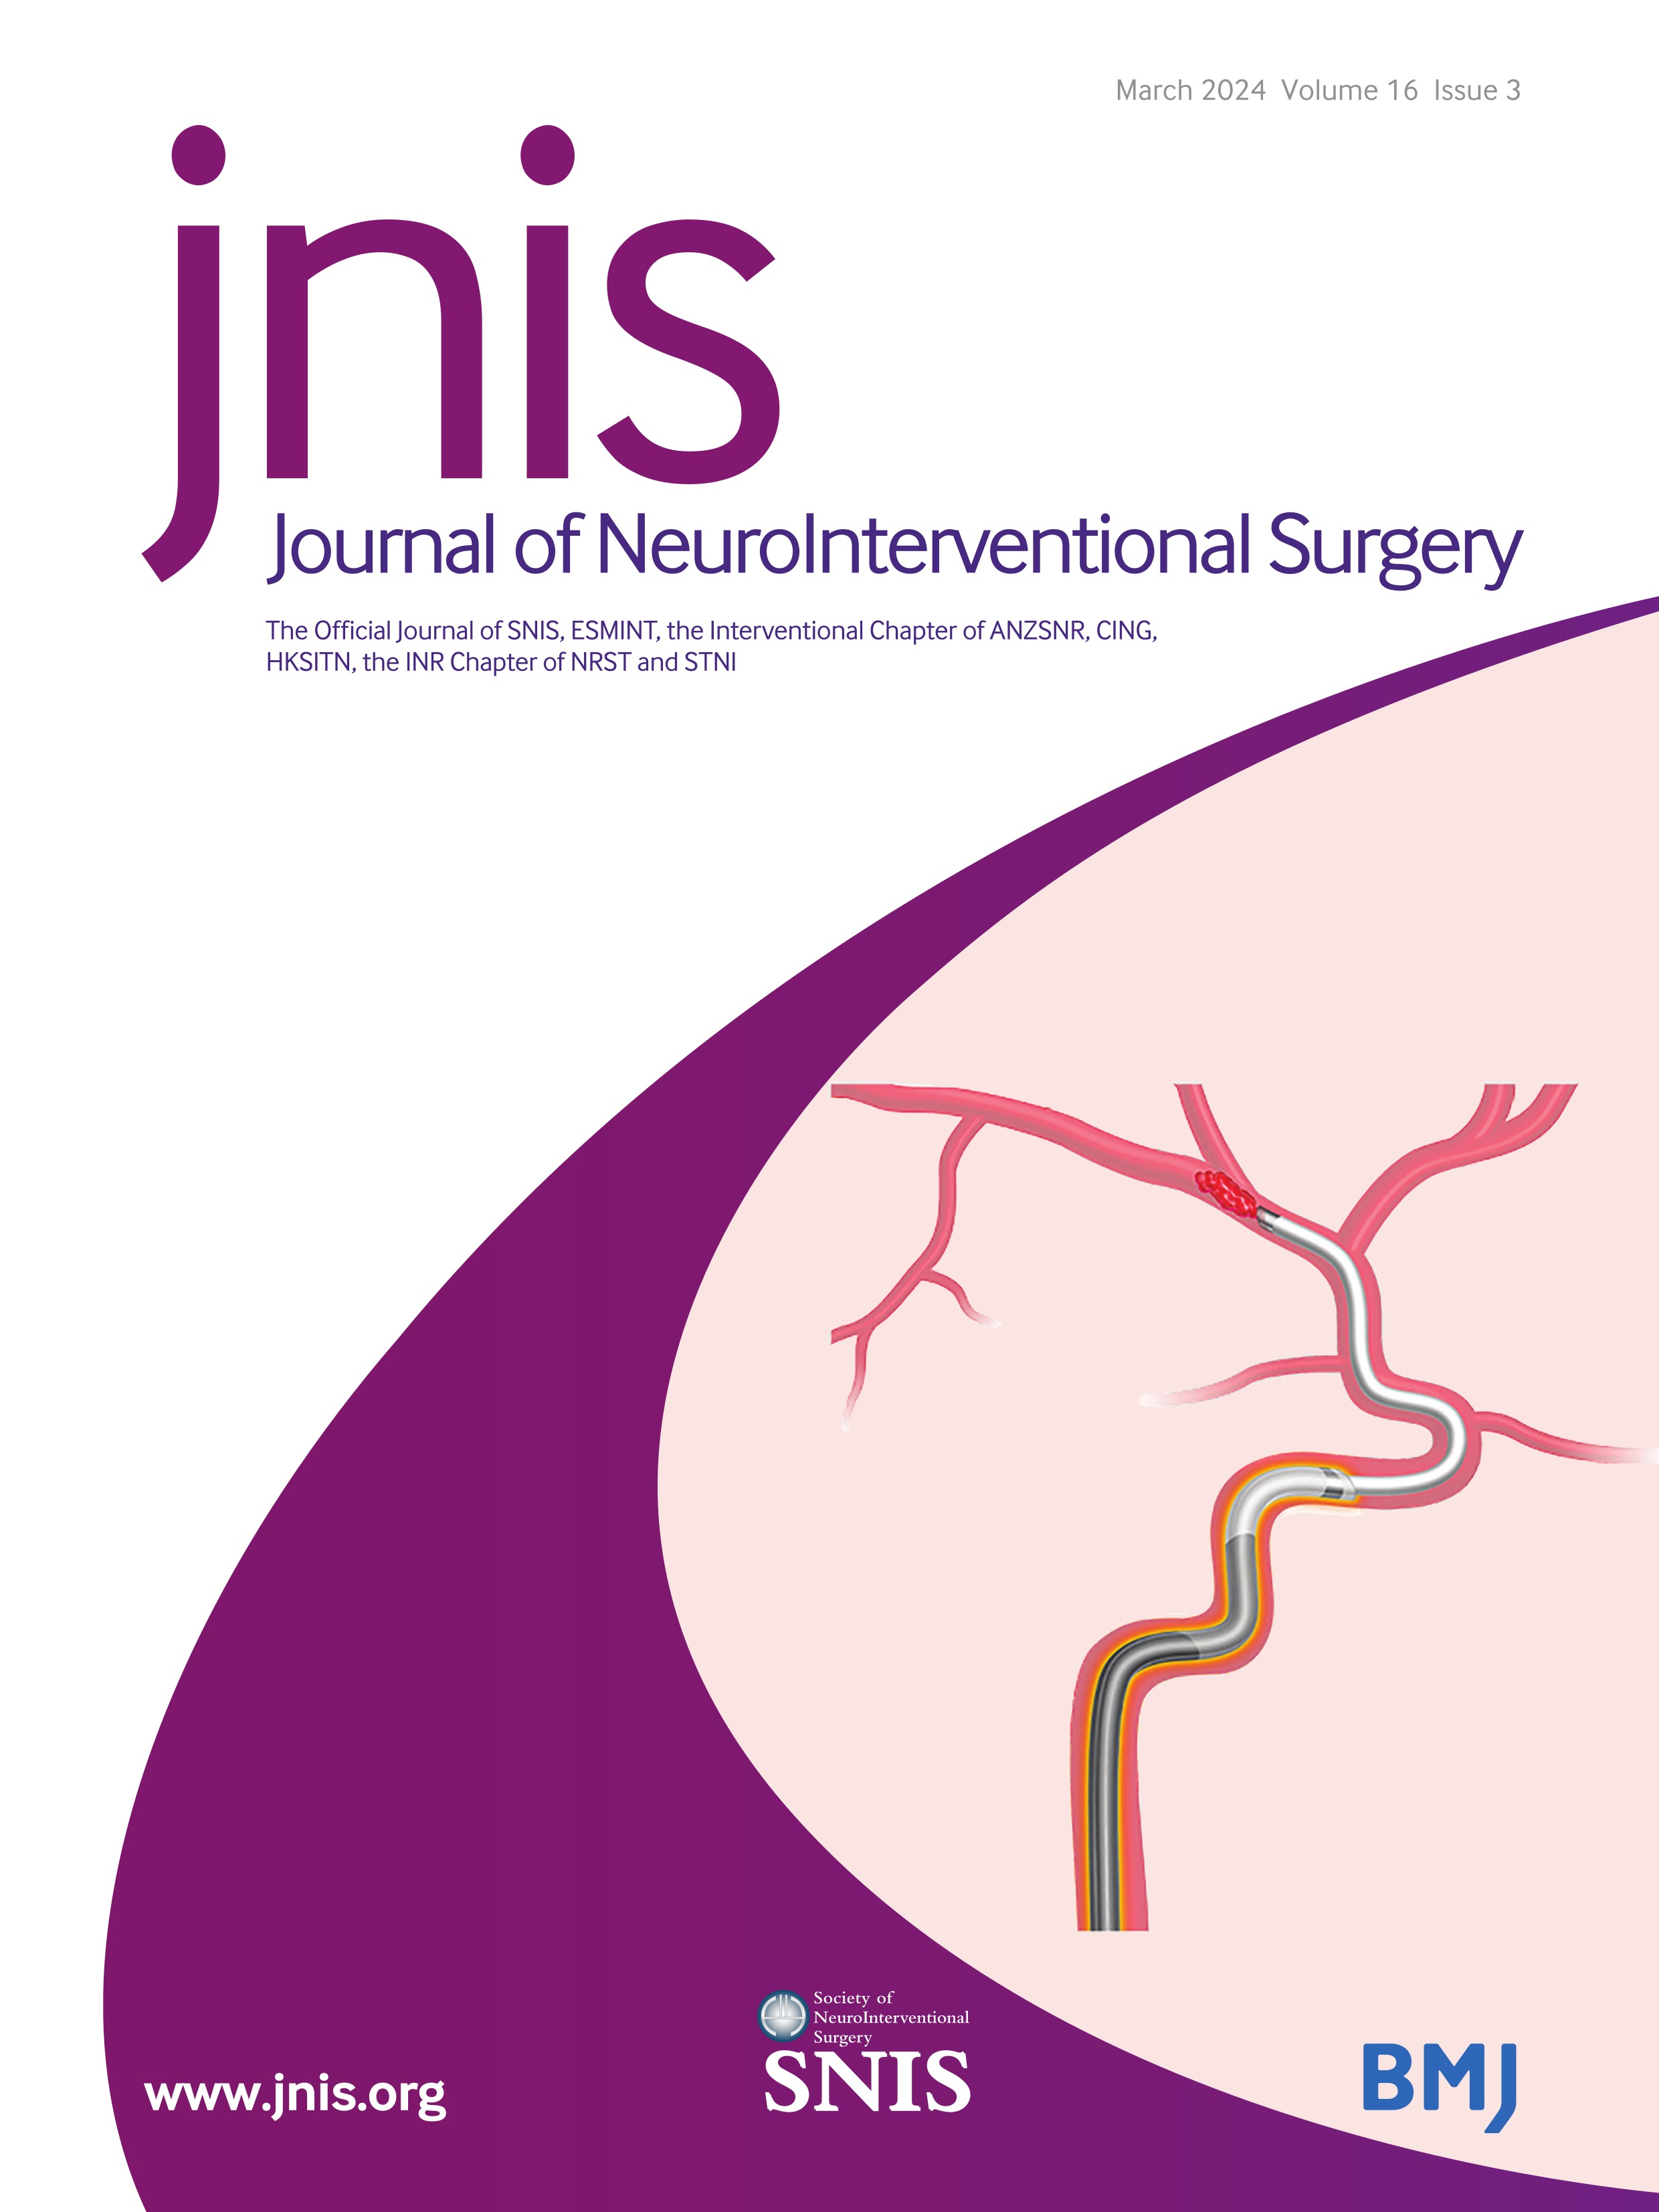 Intensive care unit admission is not necessary after venous sinus stenting